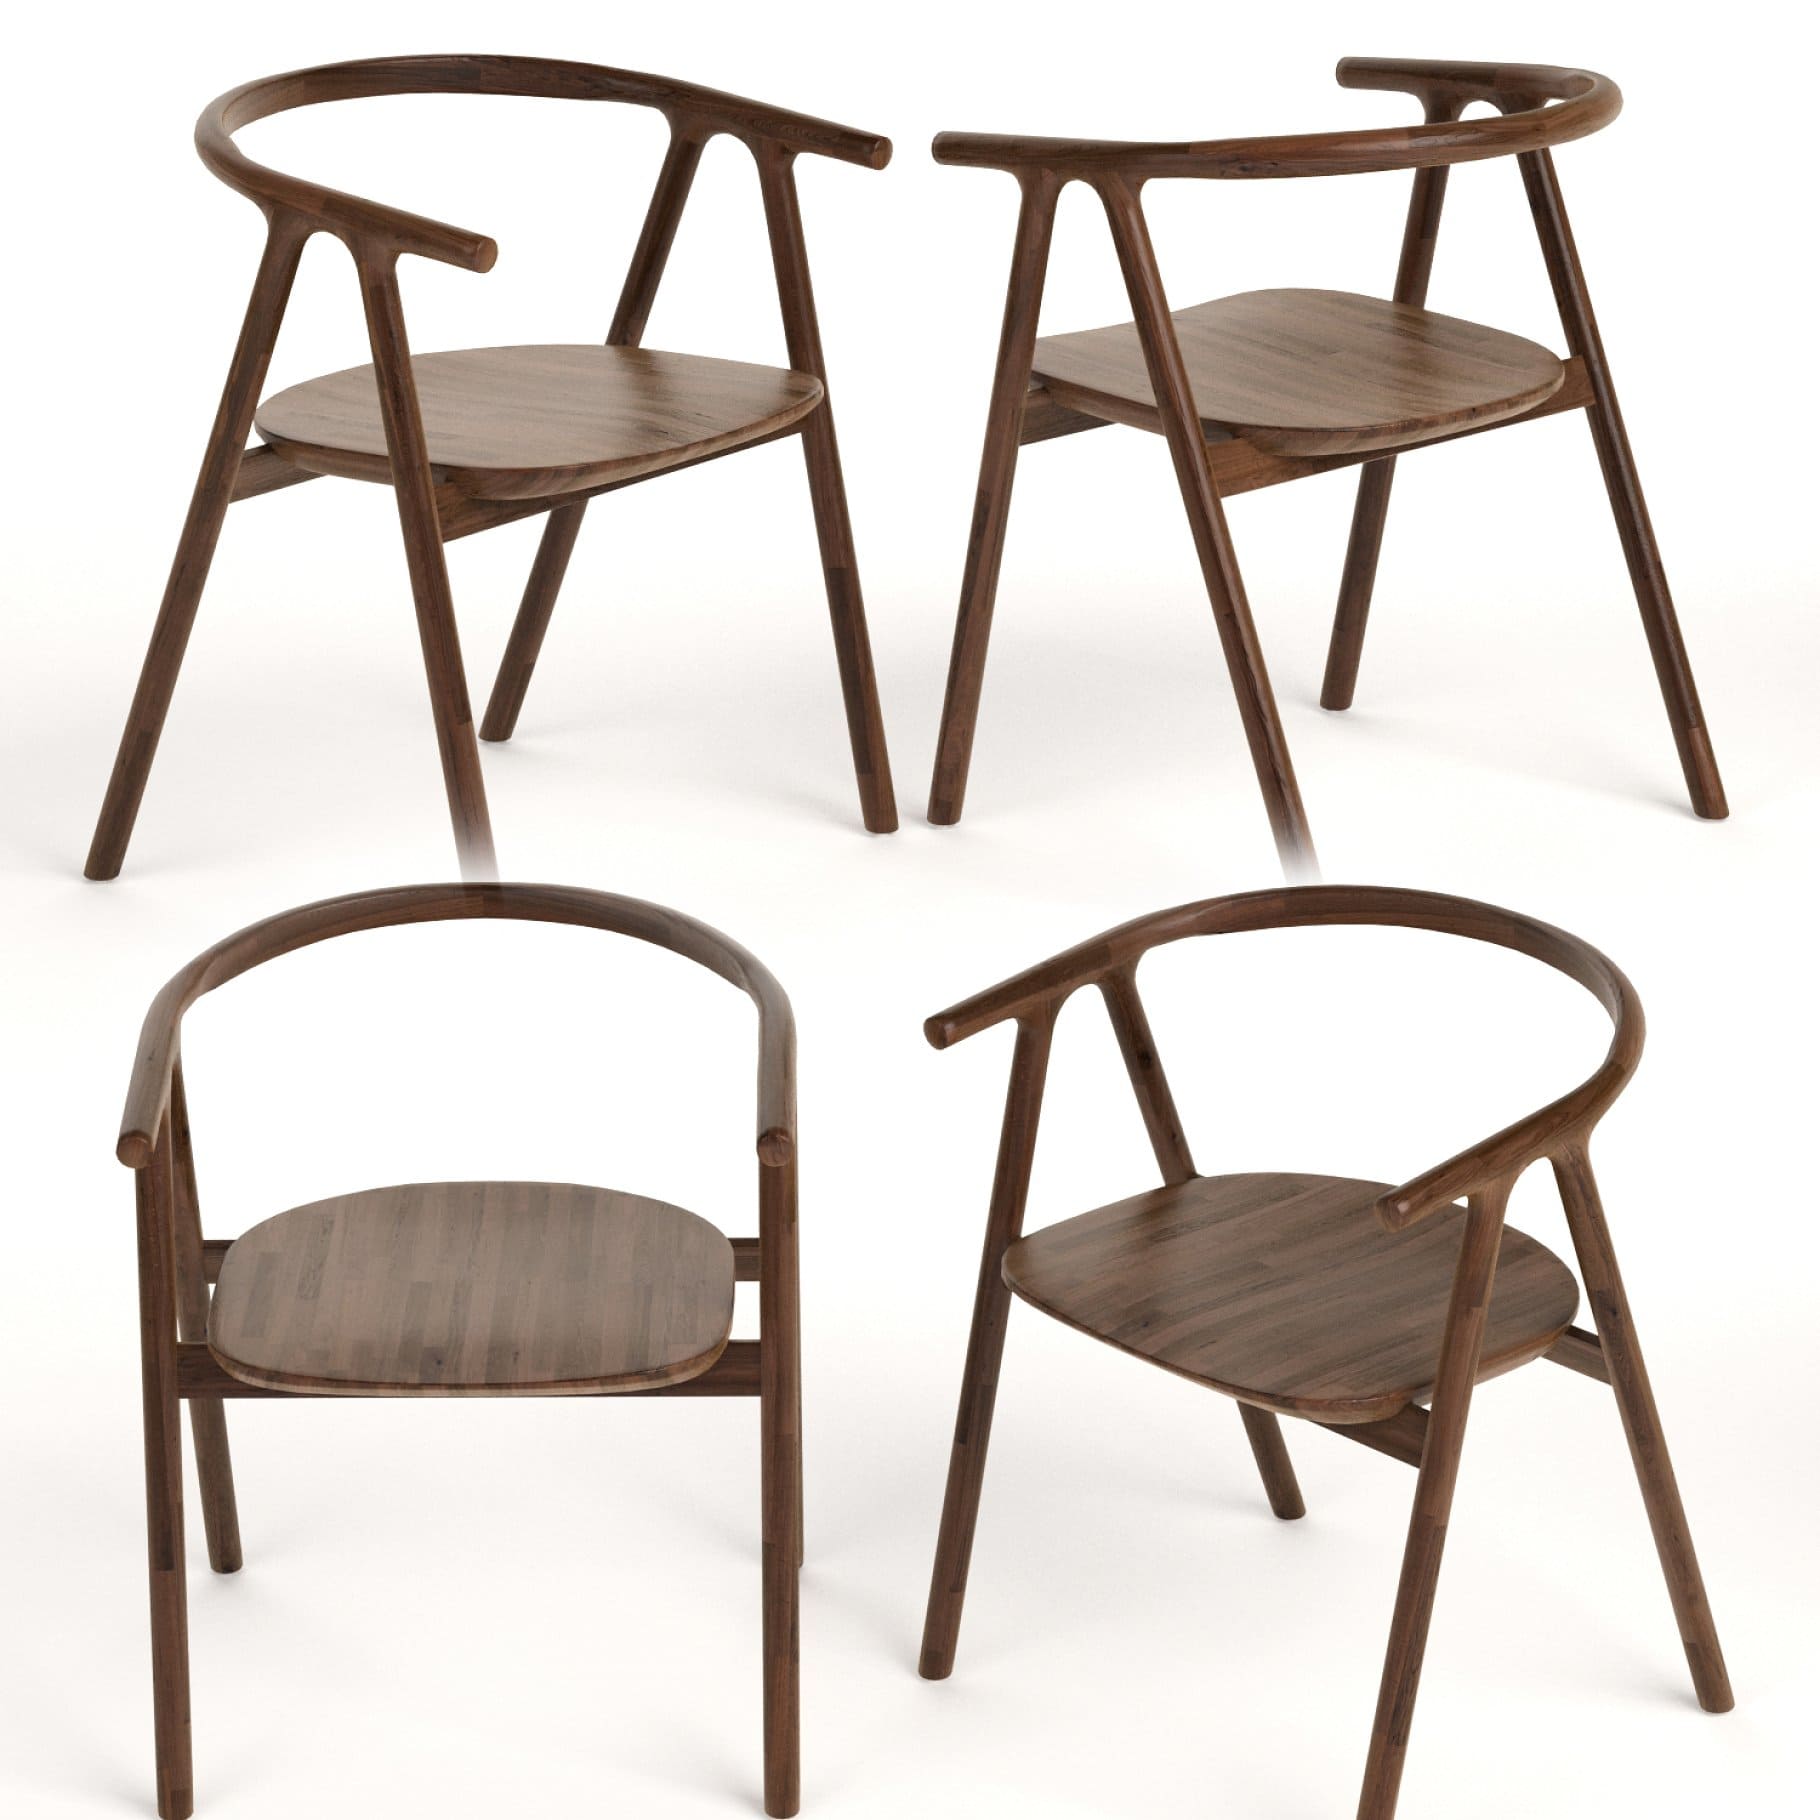 Tanaka Dining Chair Industry West from different angles.